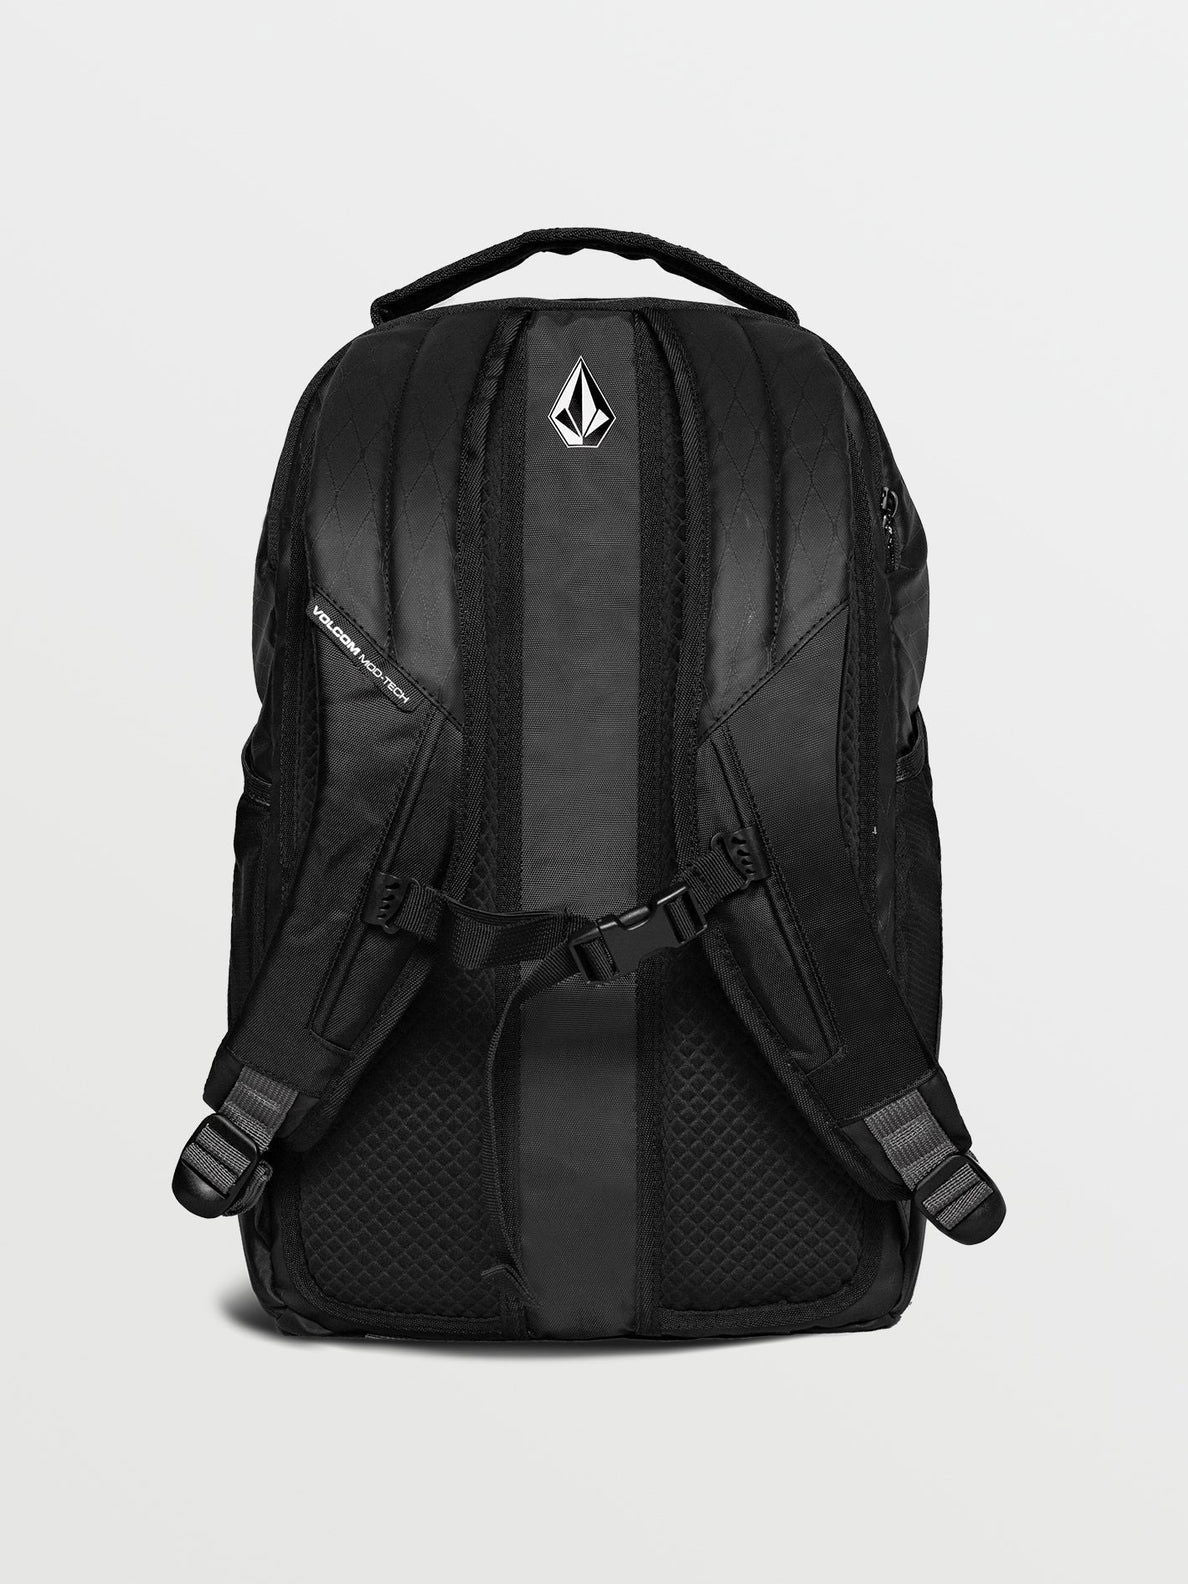 Volcom - Venture Backpack | Black -  - Married to the Sea Surf Shop - 